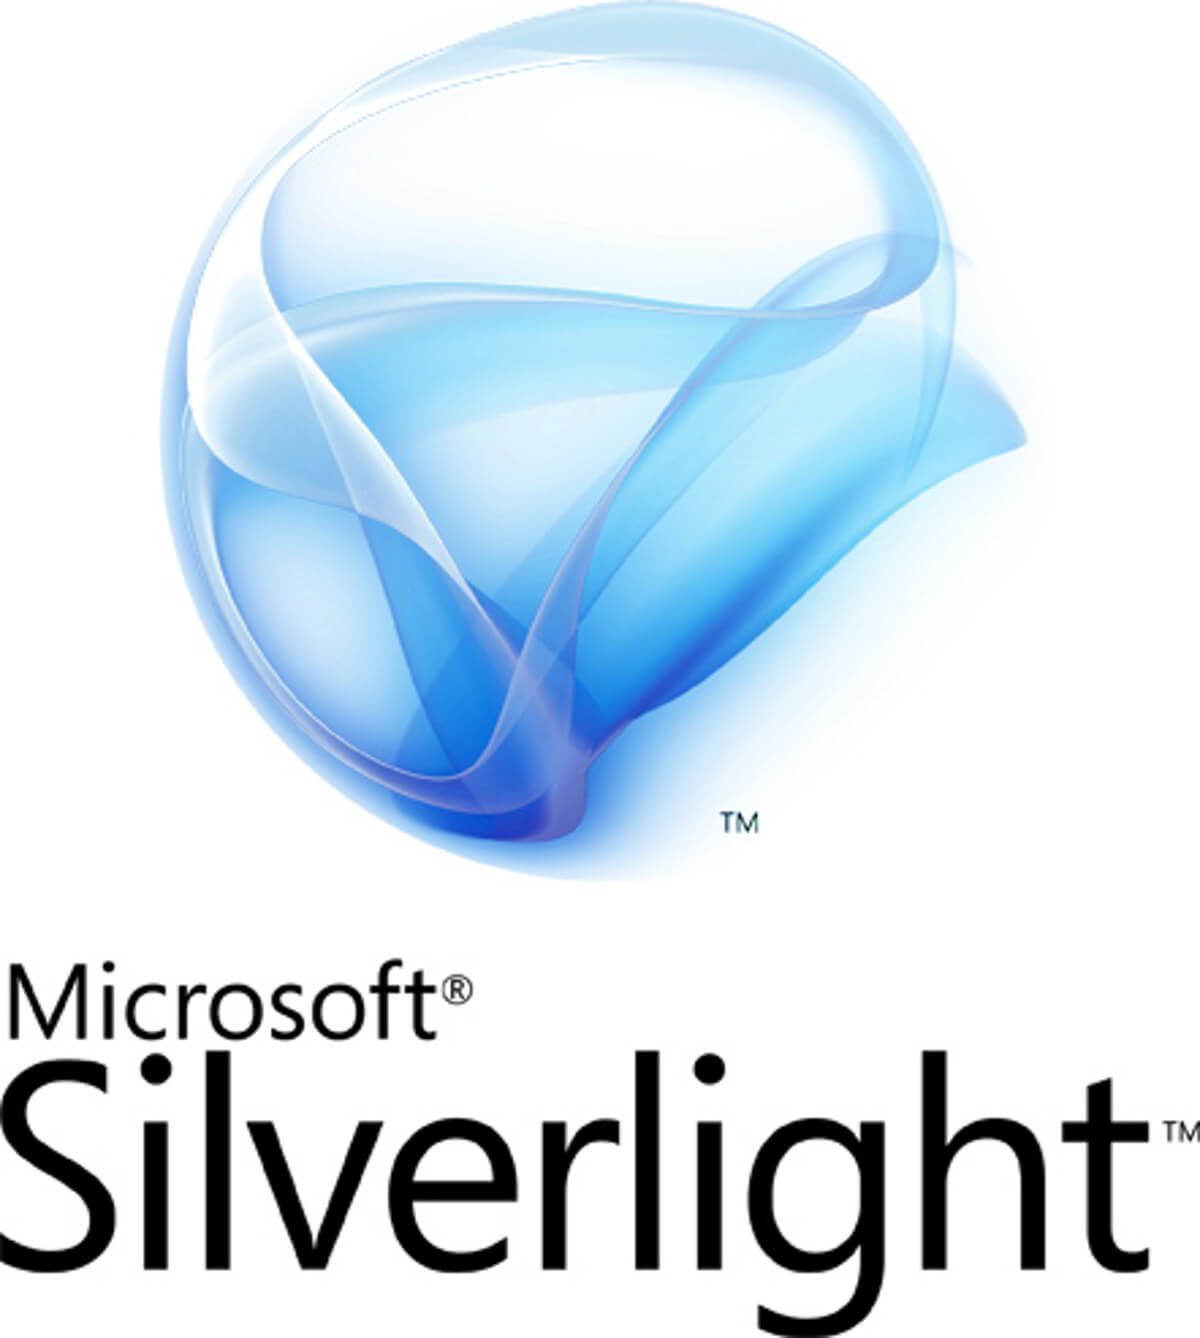 download silverlight for windows 10